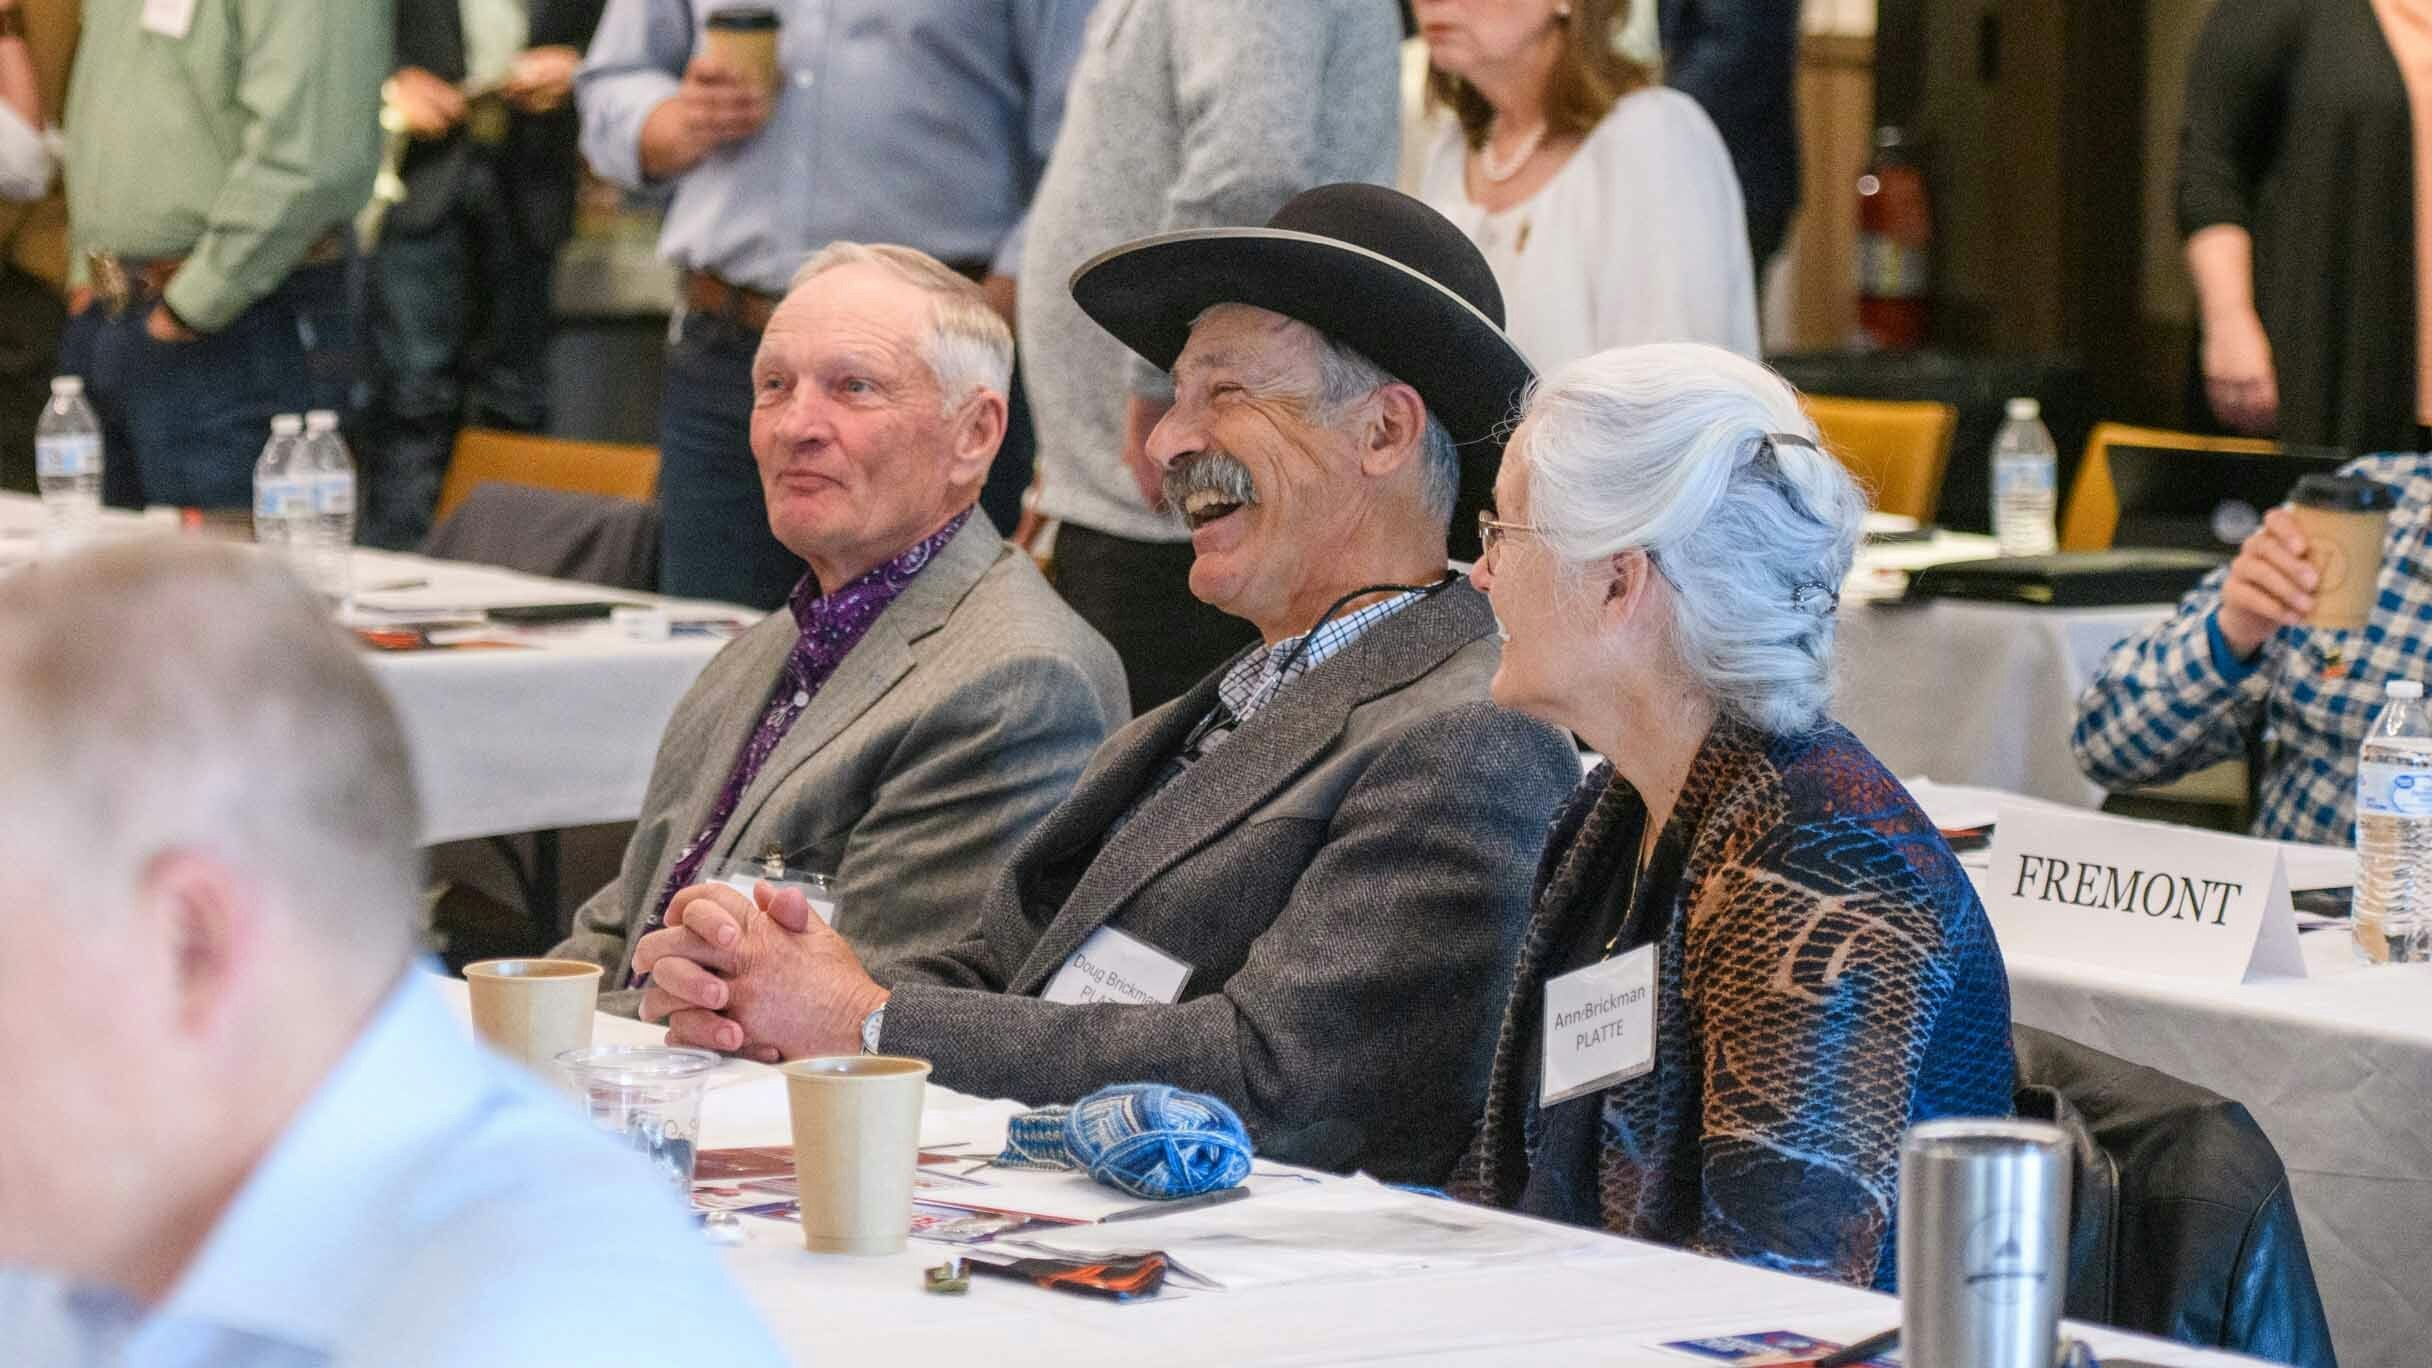 Delegates enjoy a laugh at the GOP state meeting in Jackson, Wyoming.